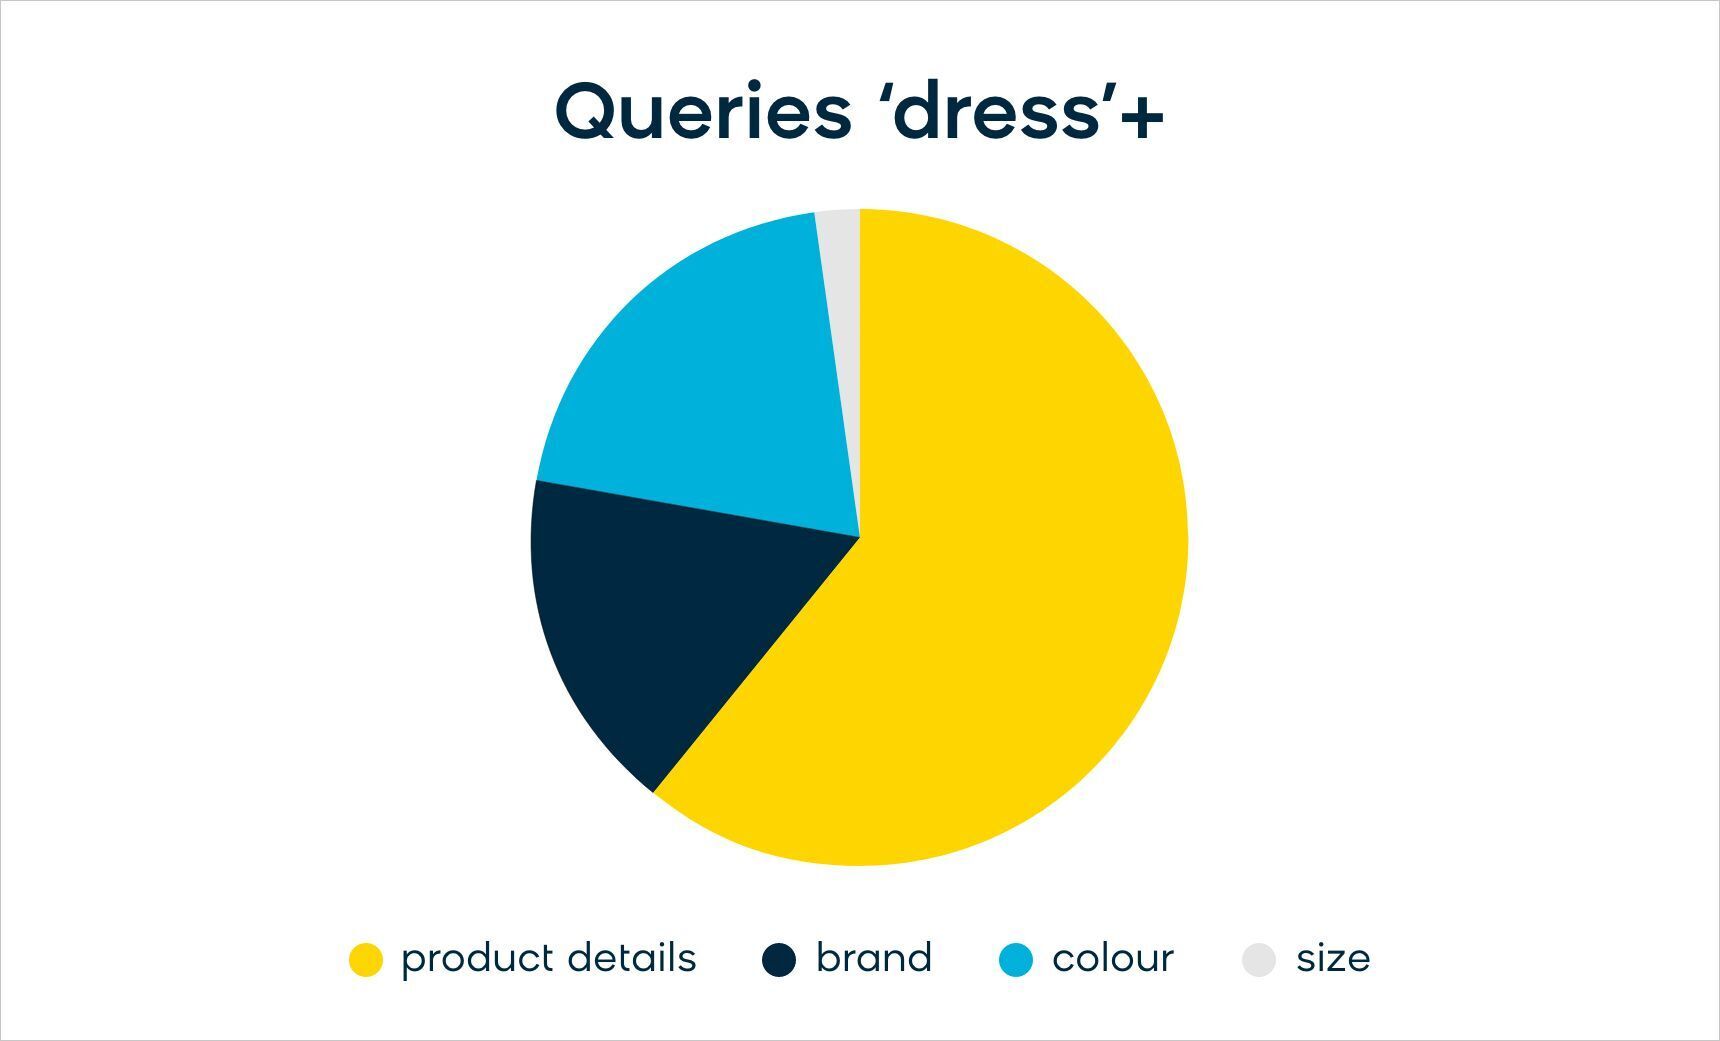 A pie chart of search intents broken down by category, specifically for the example term "dress".